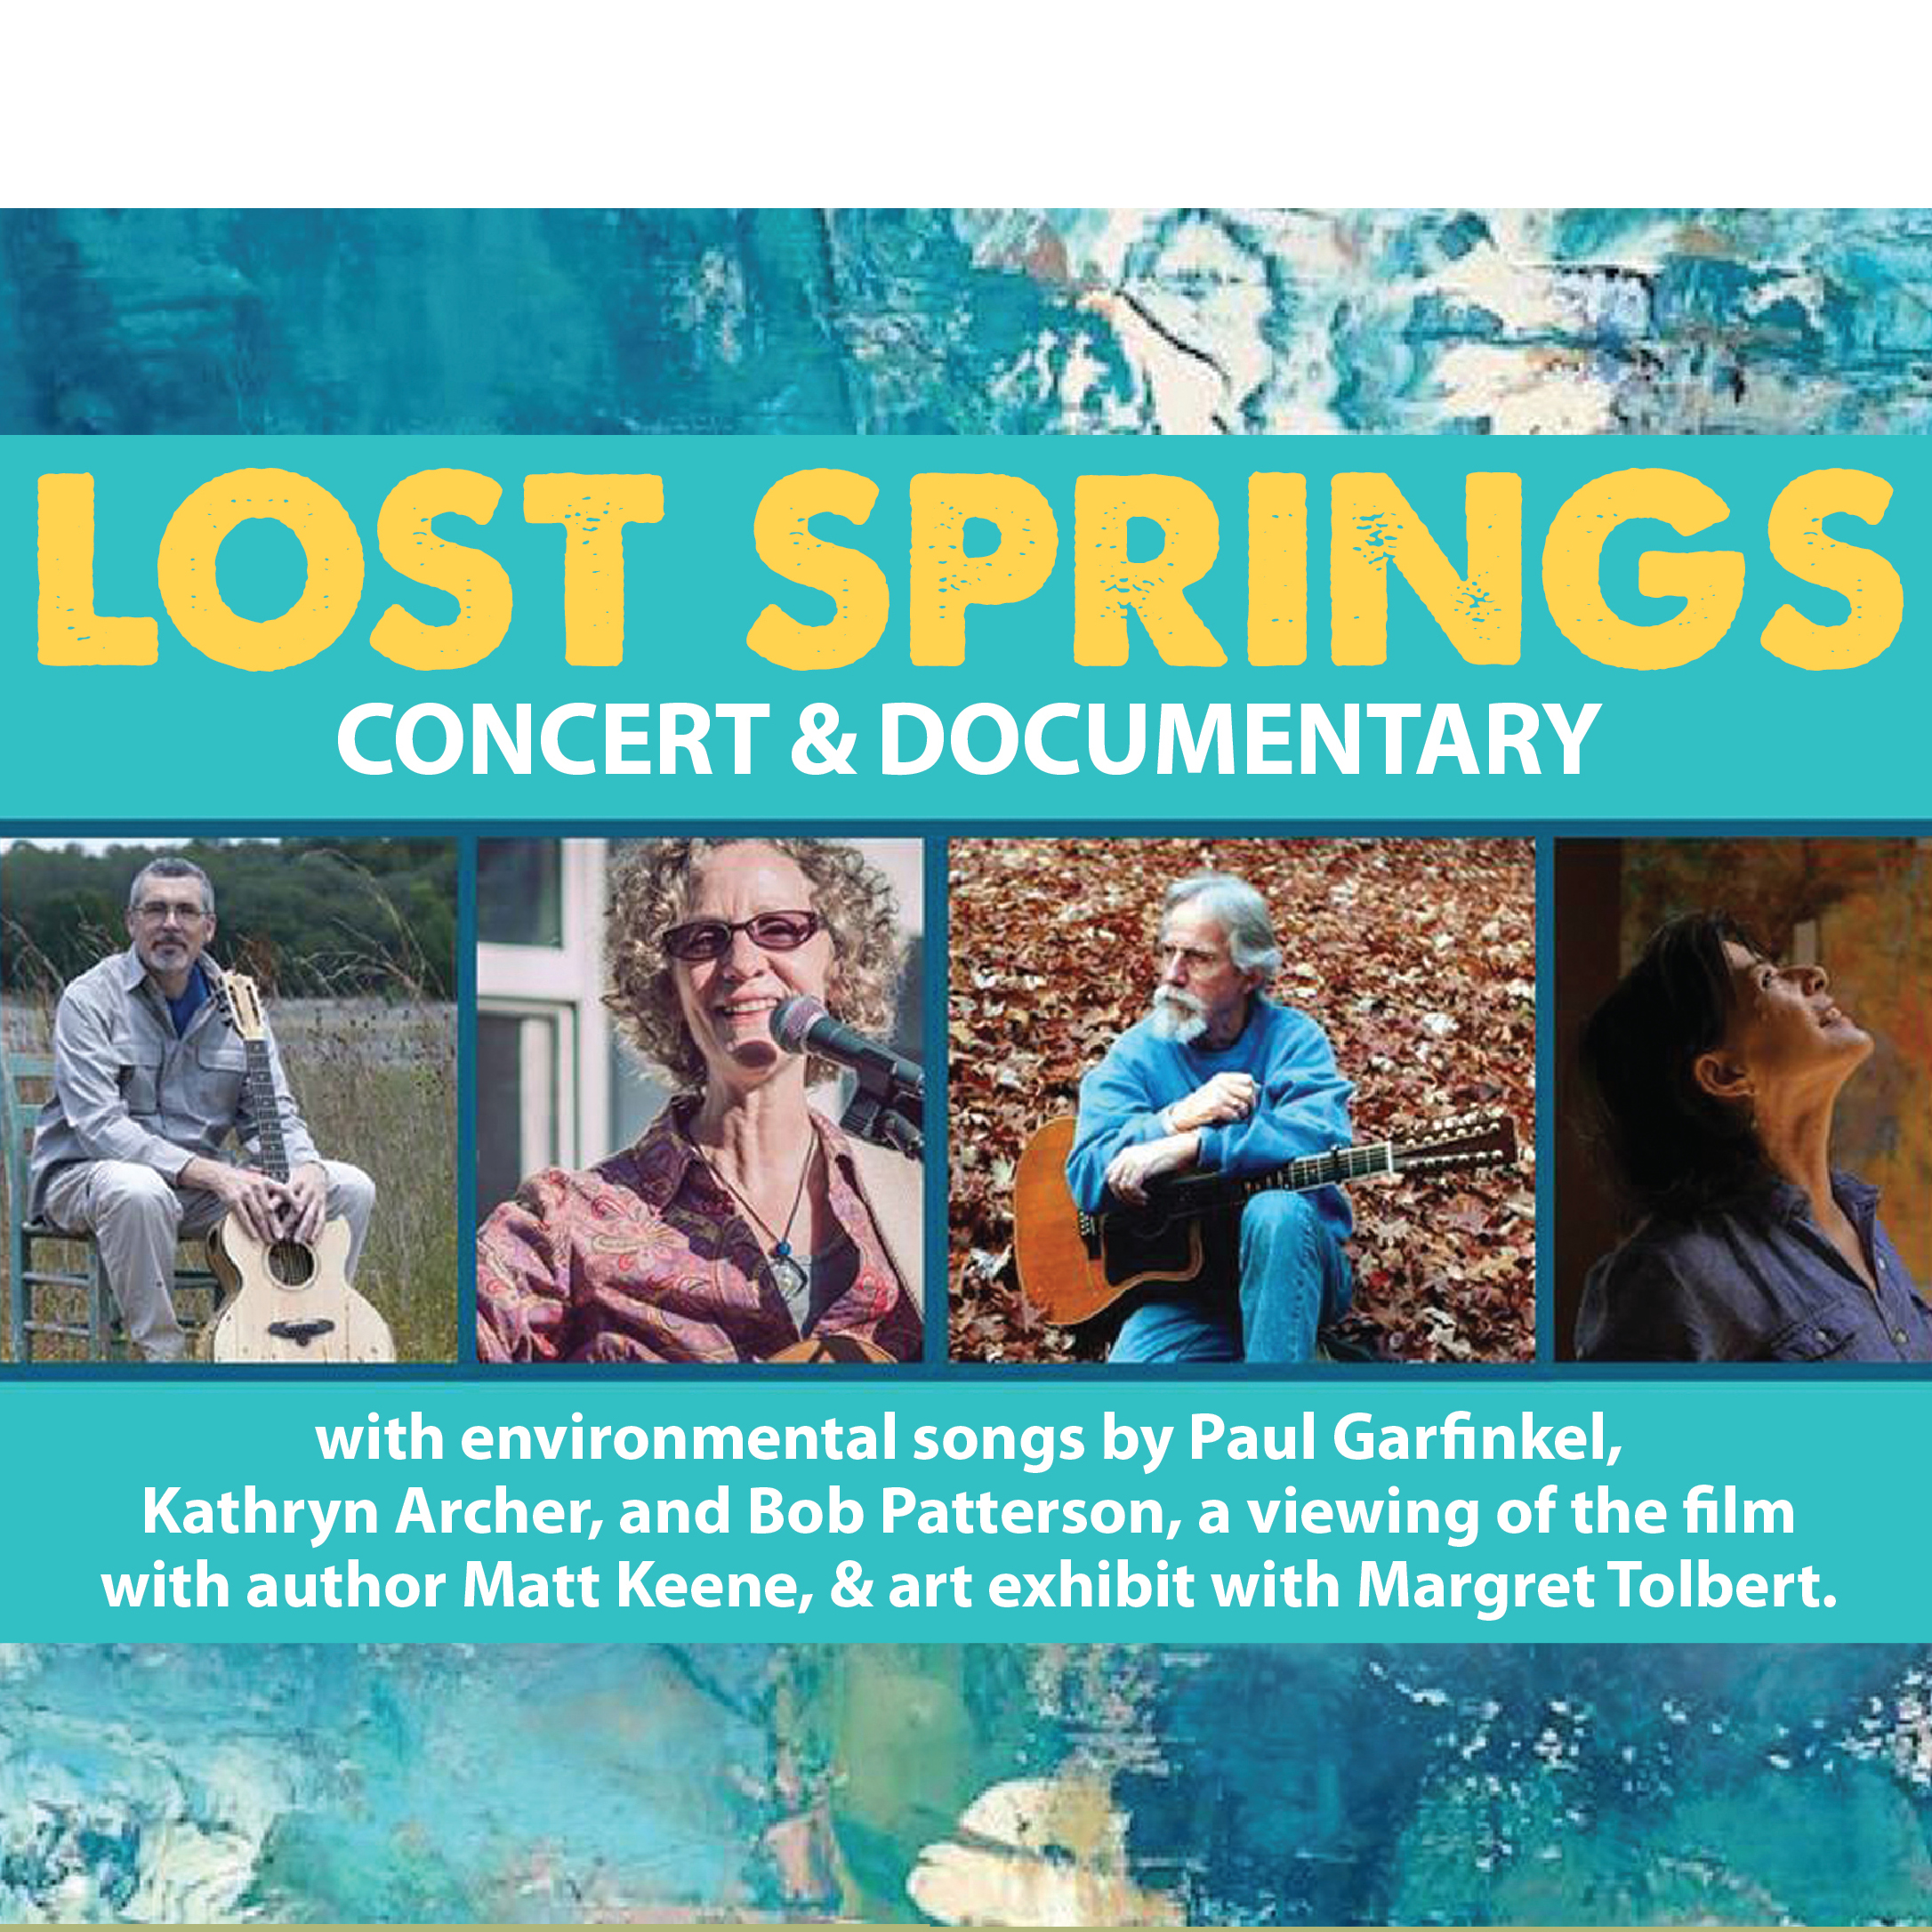 Lost Springs Concert & Documentary